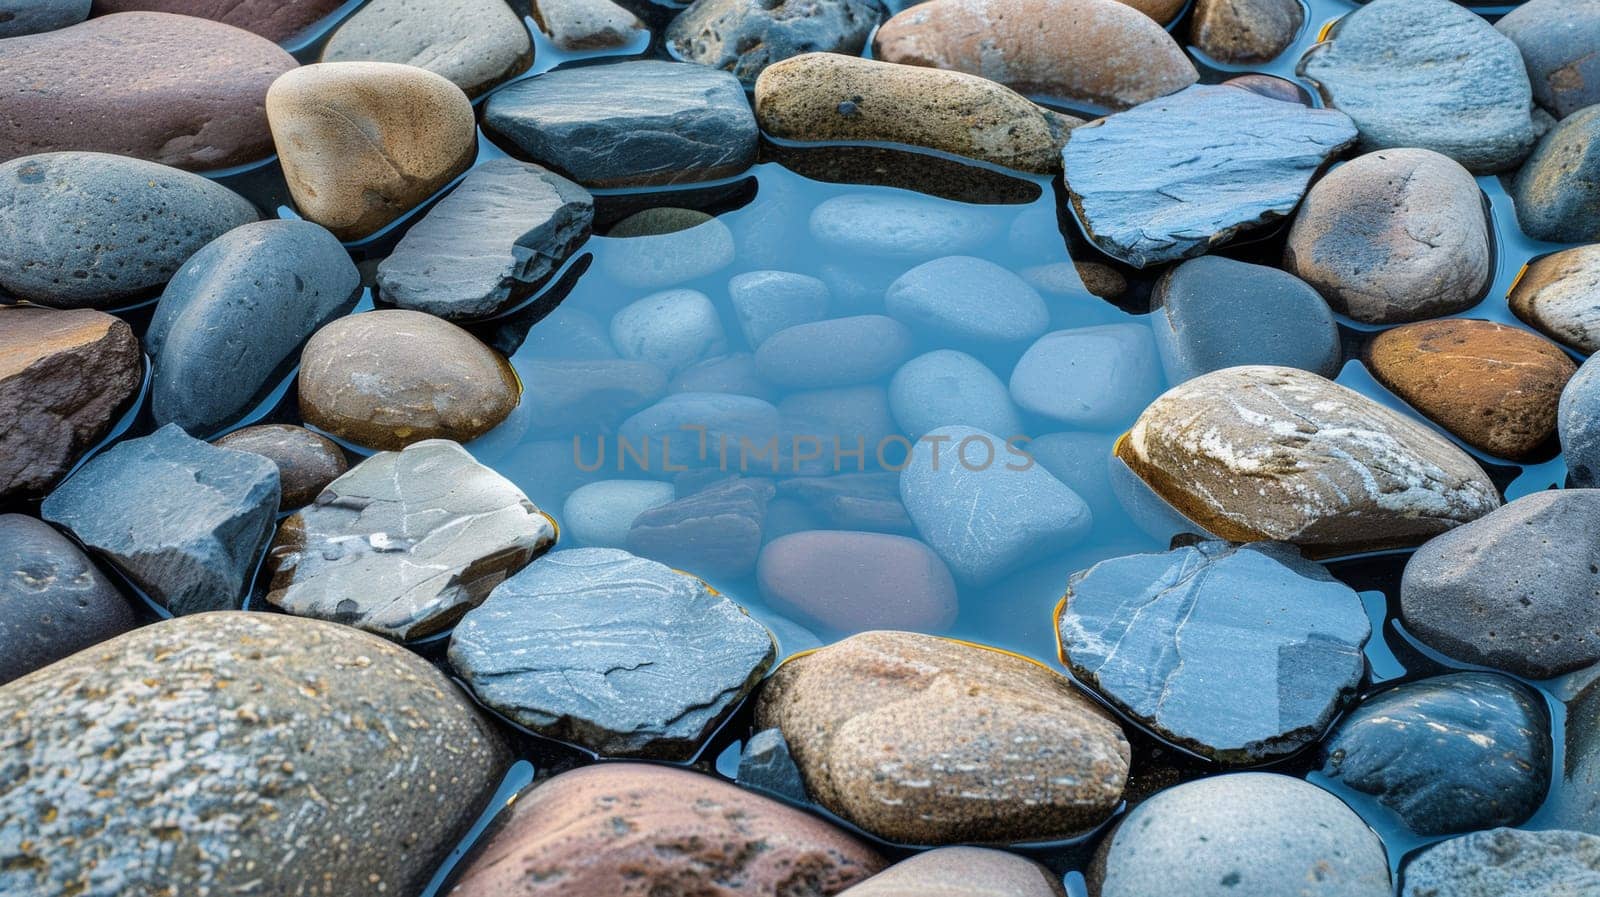 A small blue pool surrounded by rocks and pebbles, AI by starush